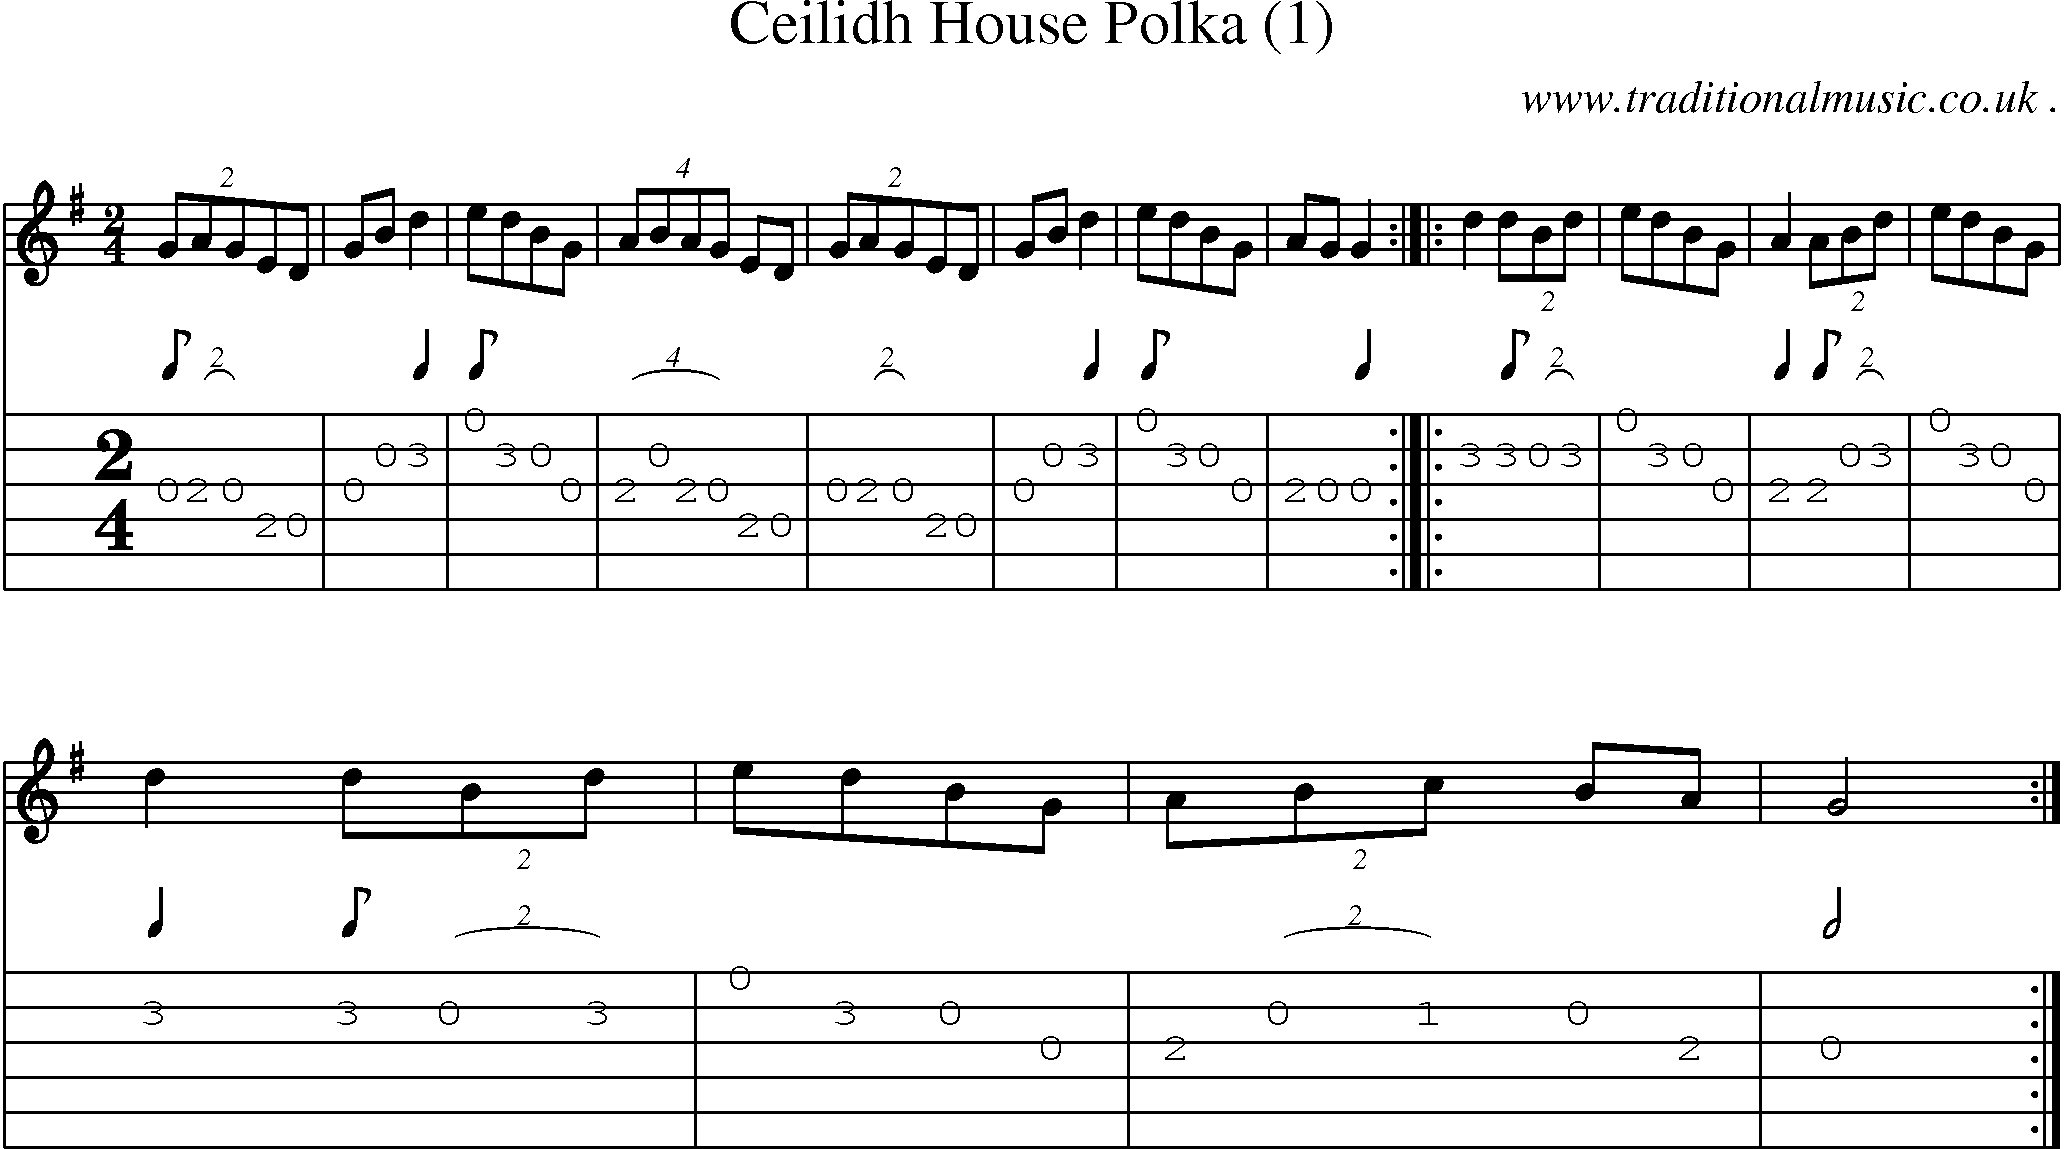 Sheet-Music and Guitar Tabs for Ceilidh House Polka (1)